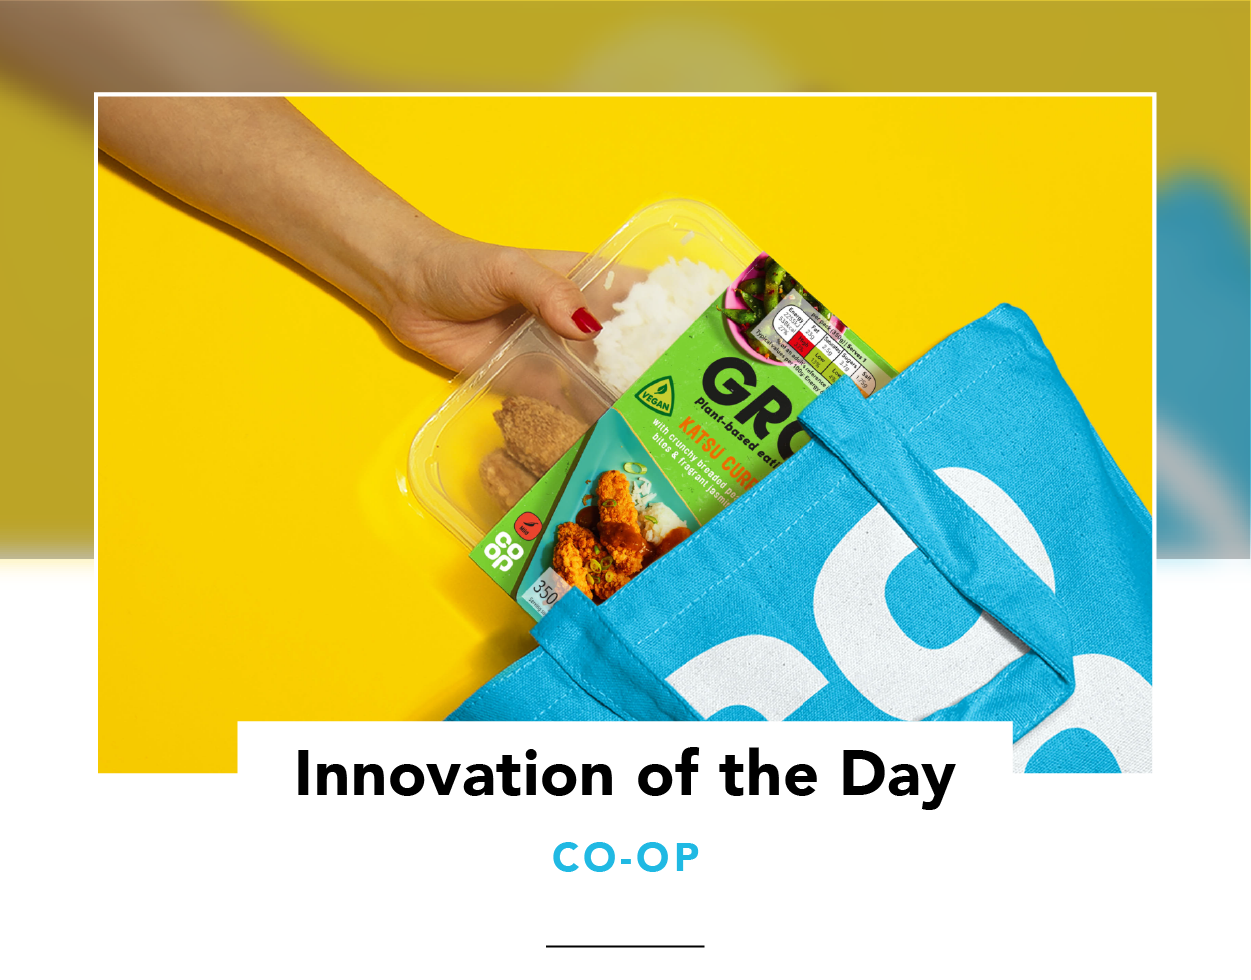 A hand pulling a GRO product out of a Co-op grocery bag